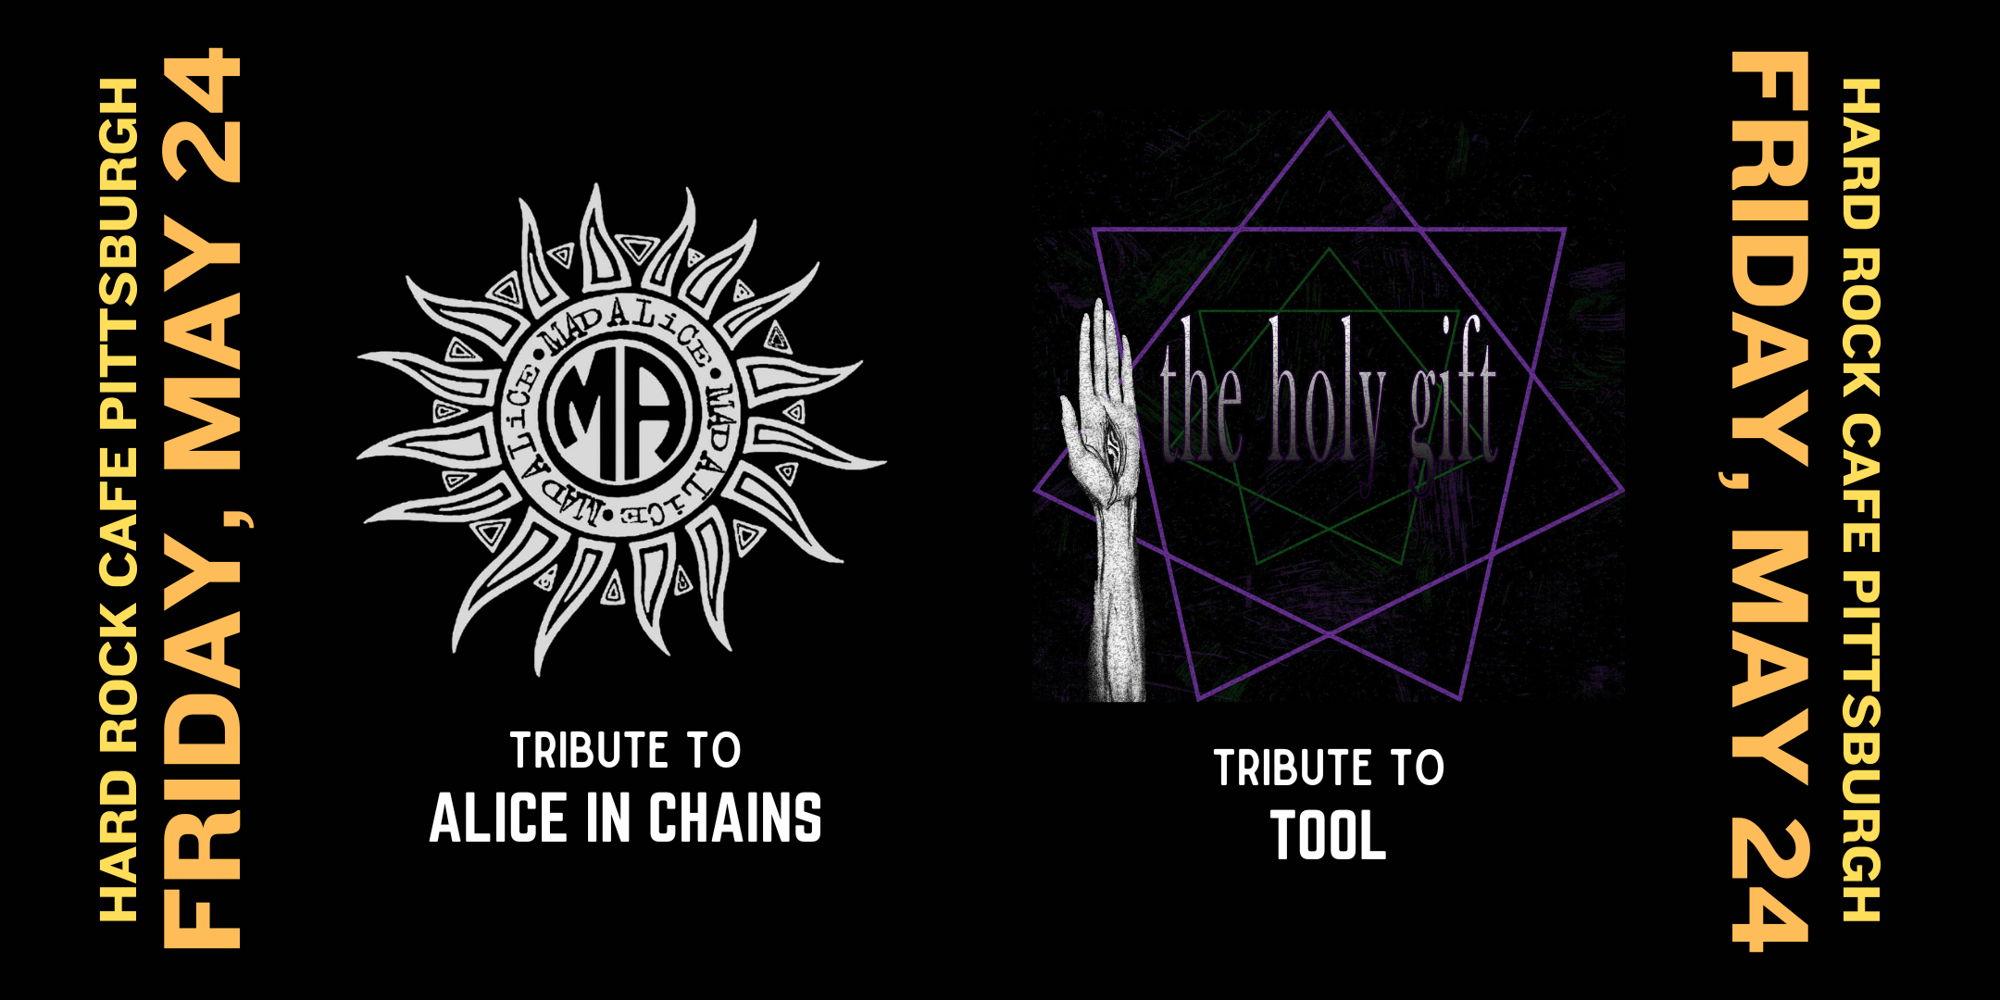 Mad Alice (Alice In Chains) & The Holy Gift (Tool) promotional image